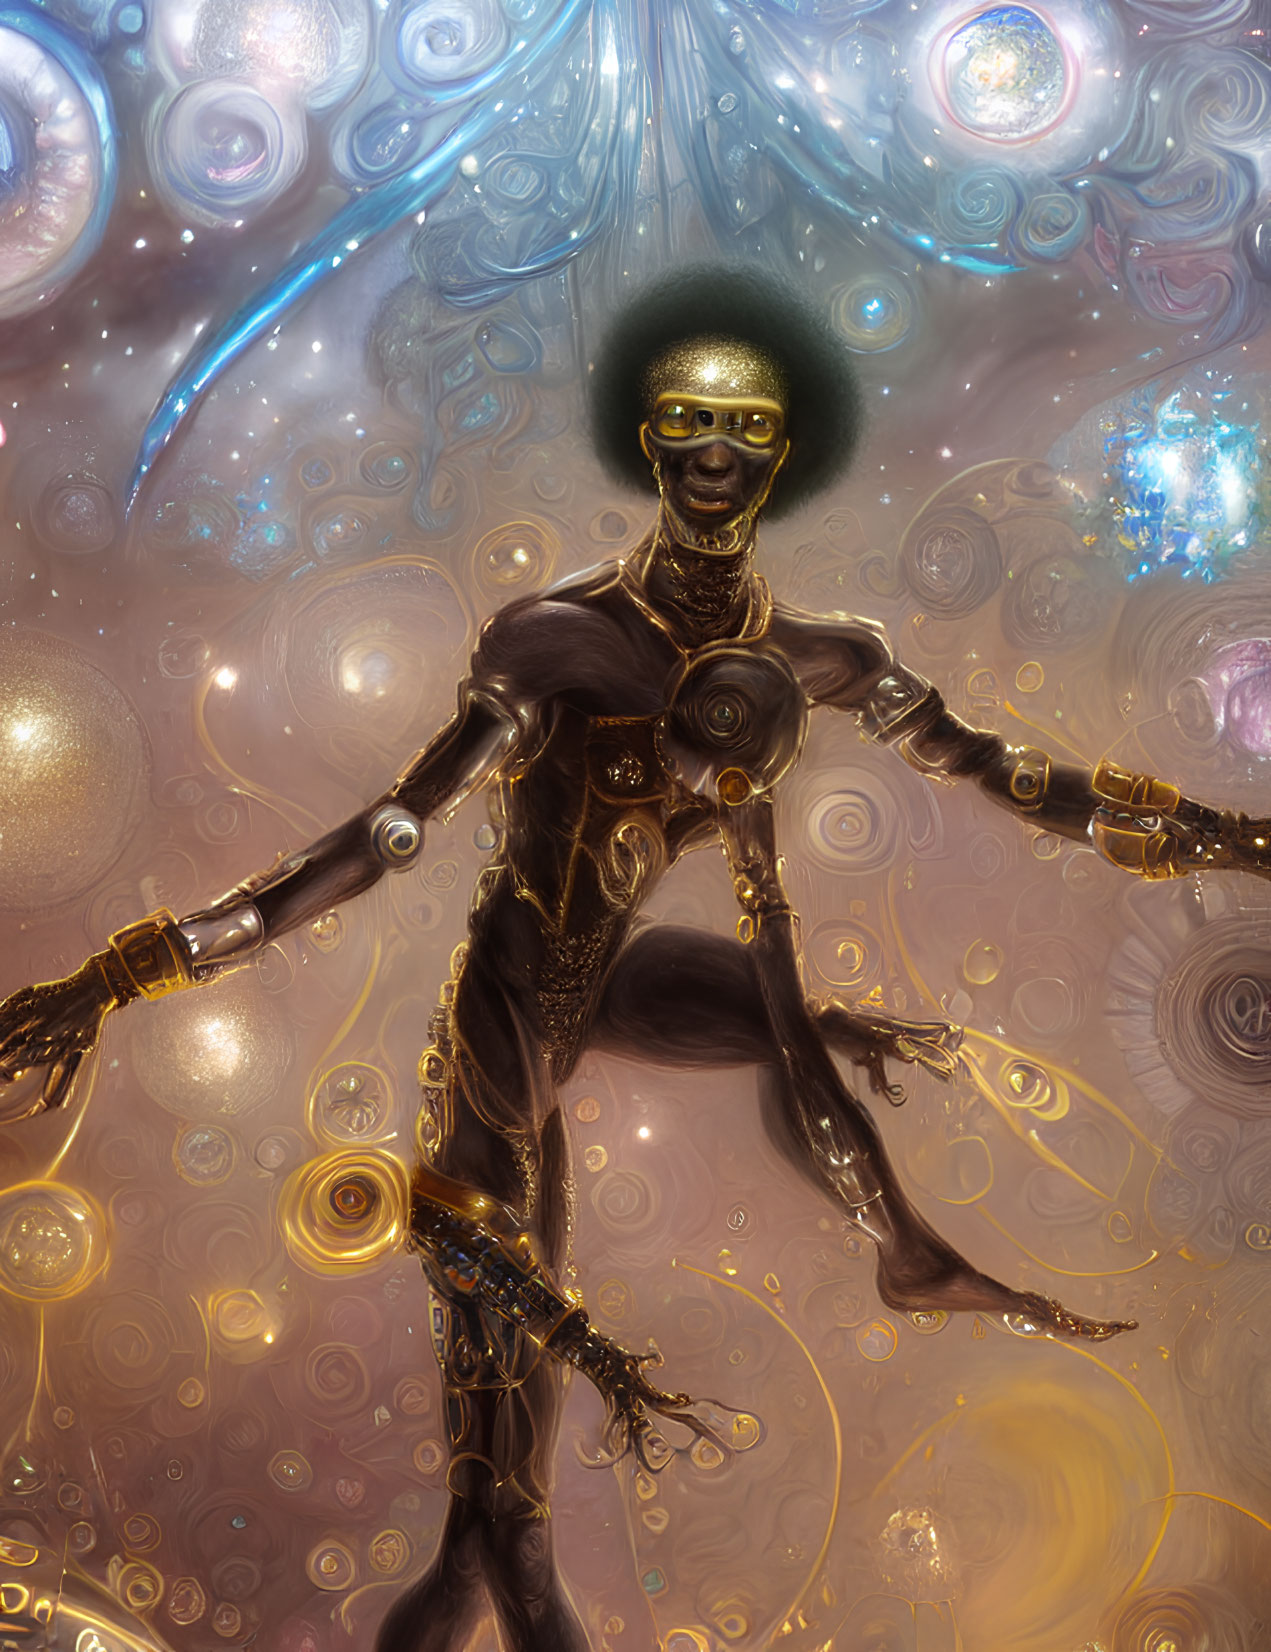 Cosmic humanoid figure with swirling patterns and starscape background